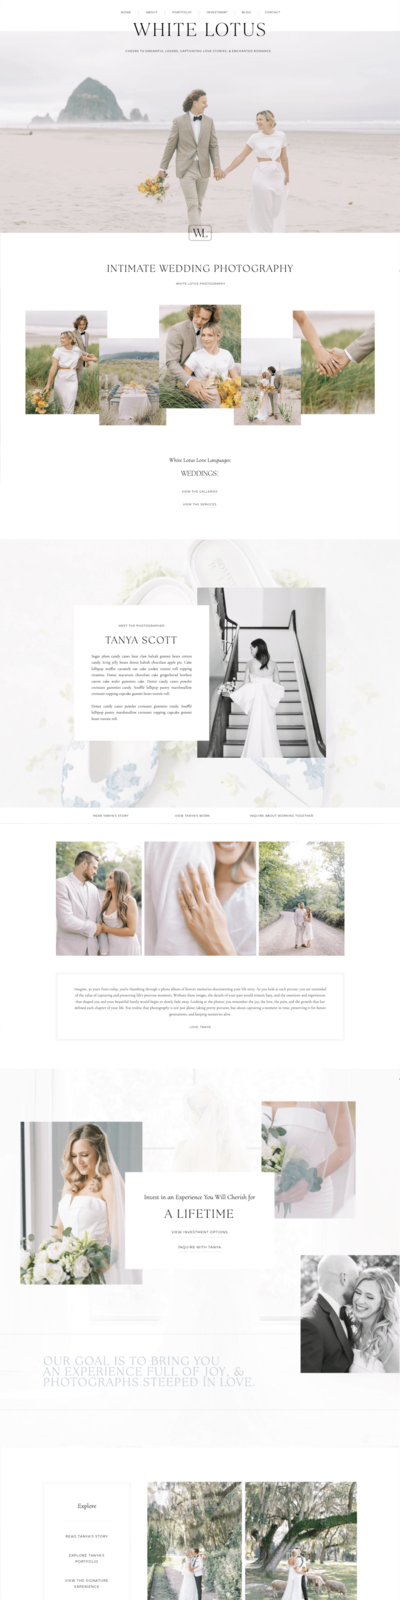 The White Lotus Showit website template for photographers and creatives.